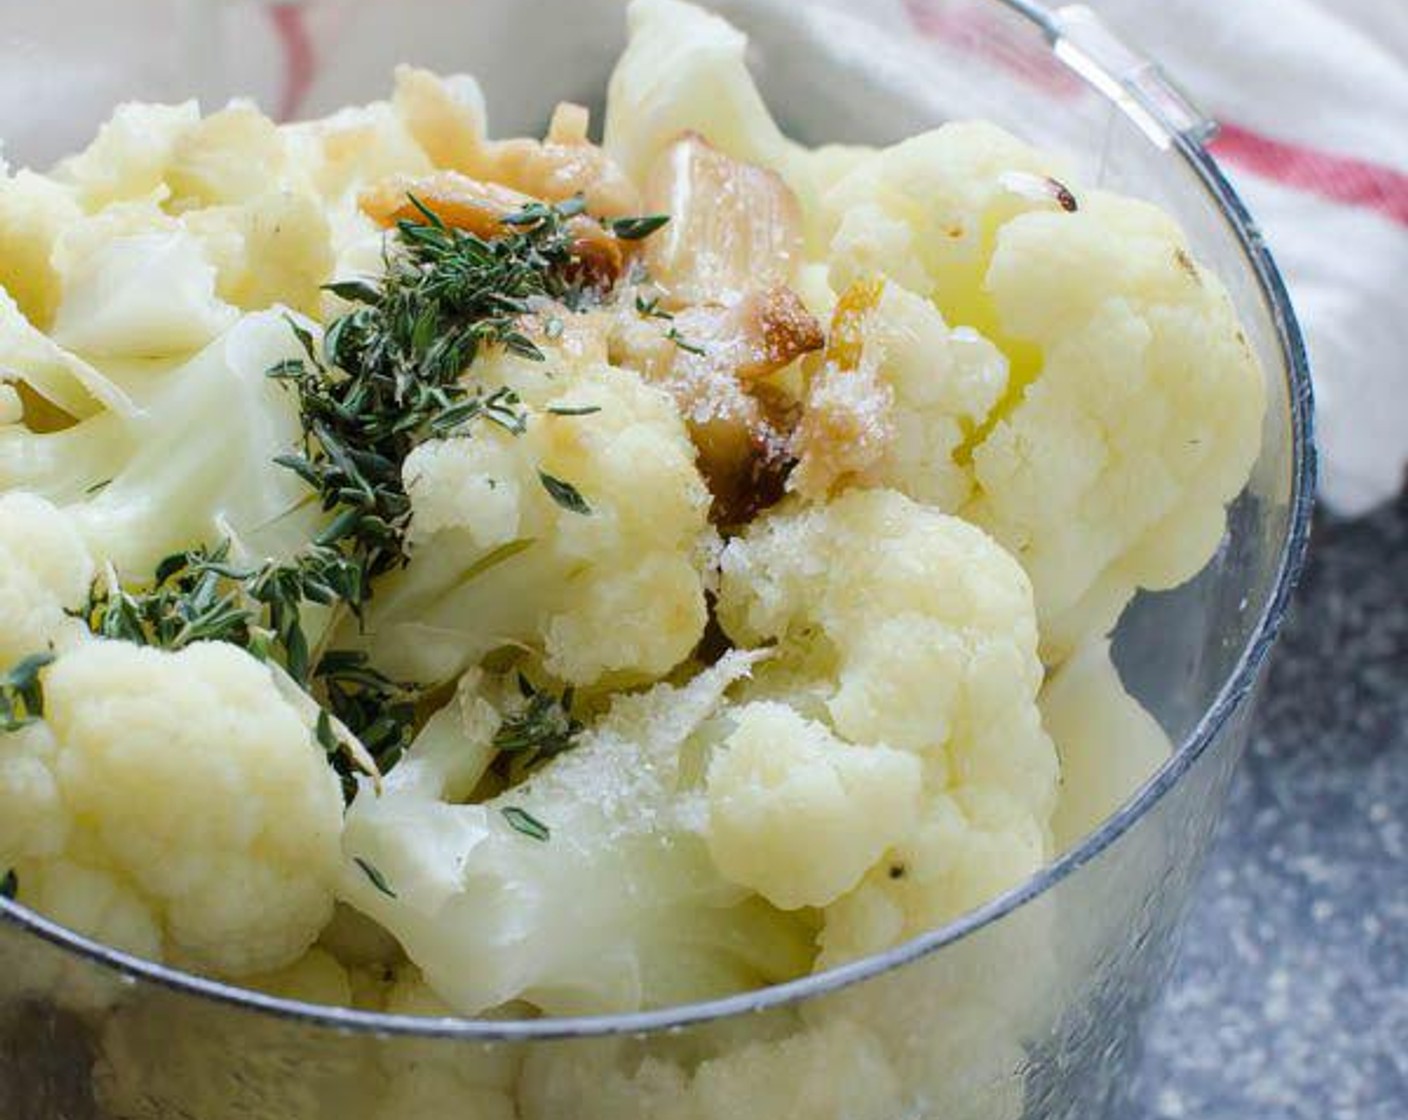 step 5 Transfer cauliflower to a food processor. Squeeze the individual cloves of roasted garlic into the cauliflower. Add the Fresh Thyme (1/2 Tbsp) and secure the lid on the food processor.